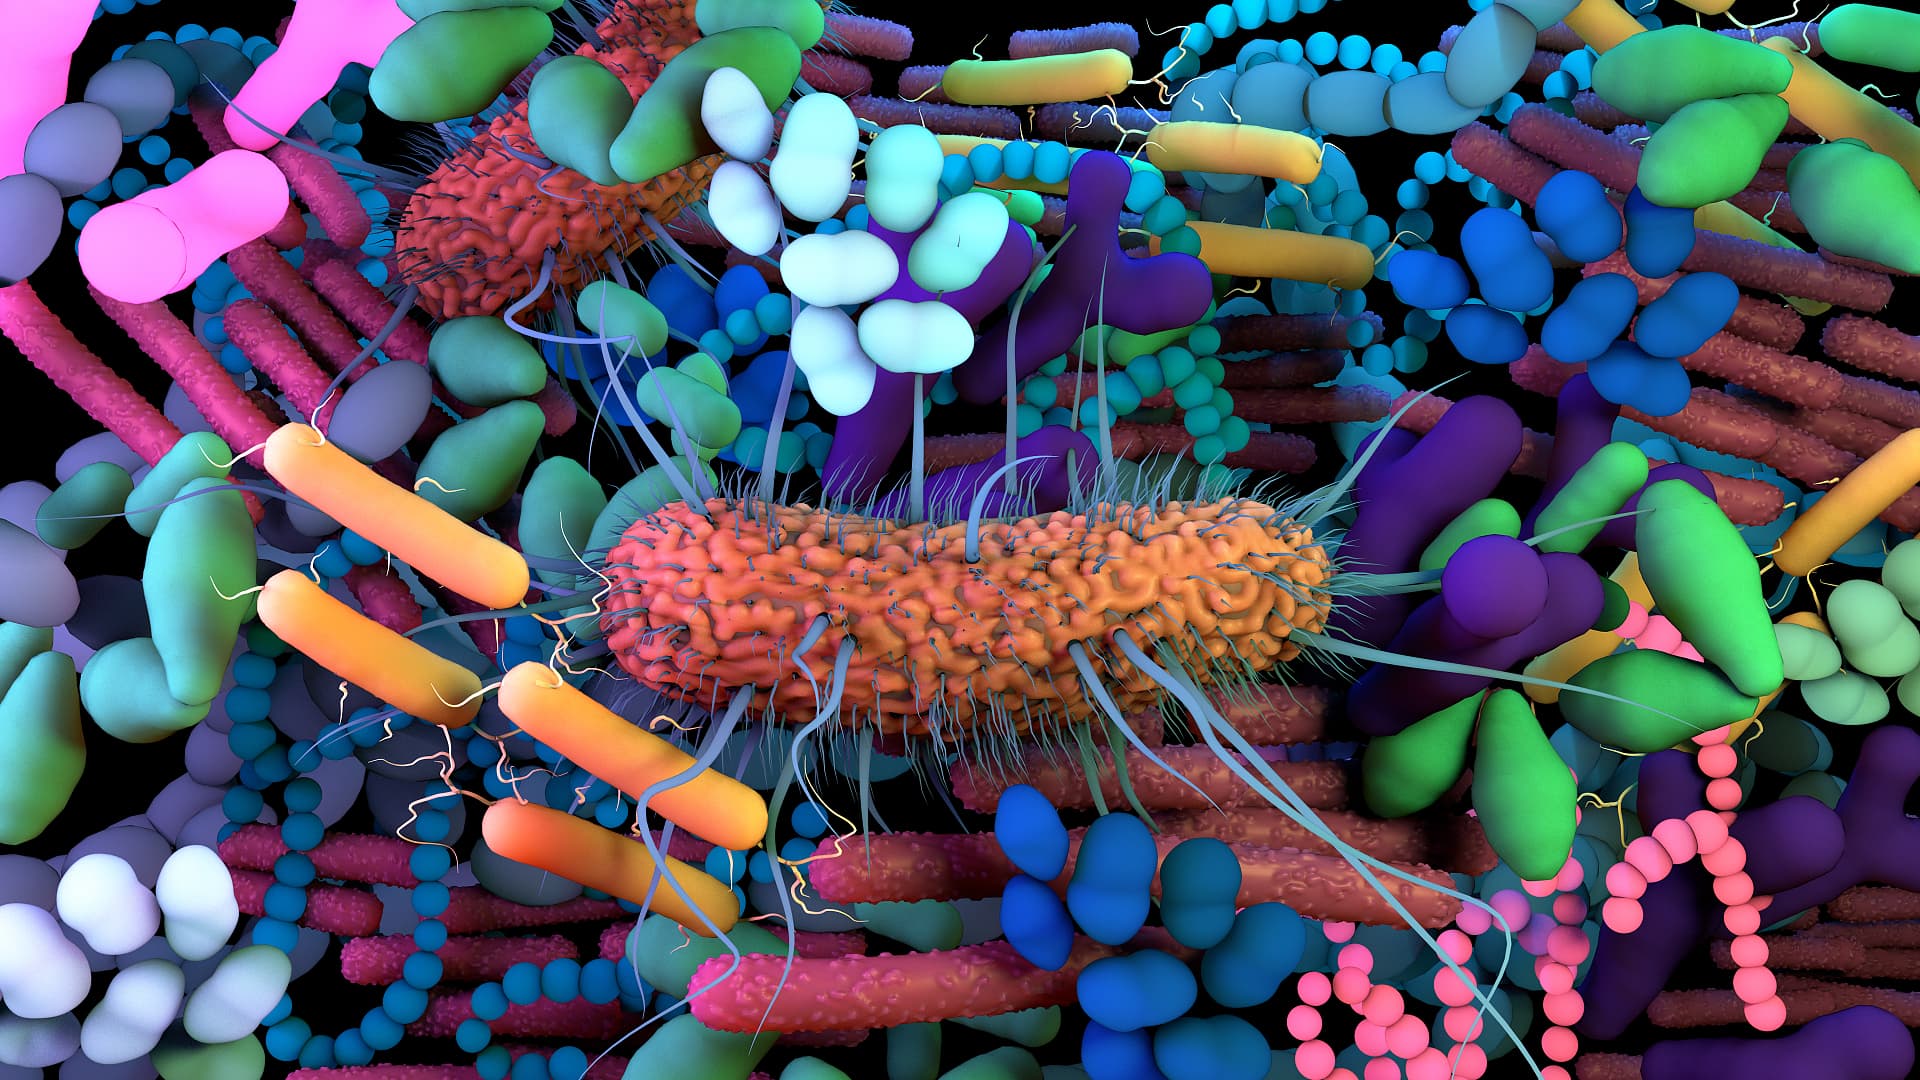 Microbiome Research: Traces of Unidentified Bacteria Everywhere